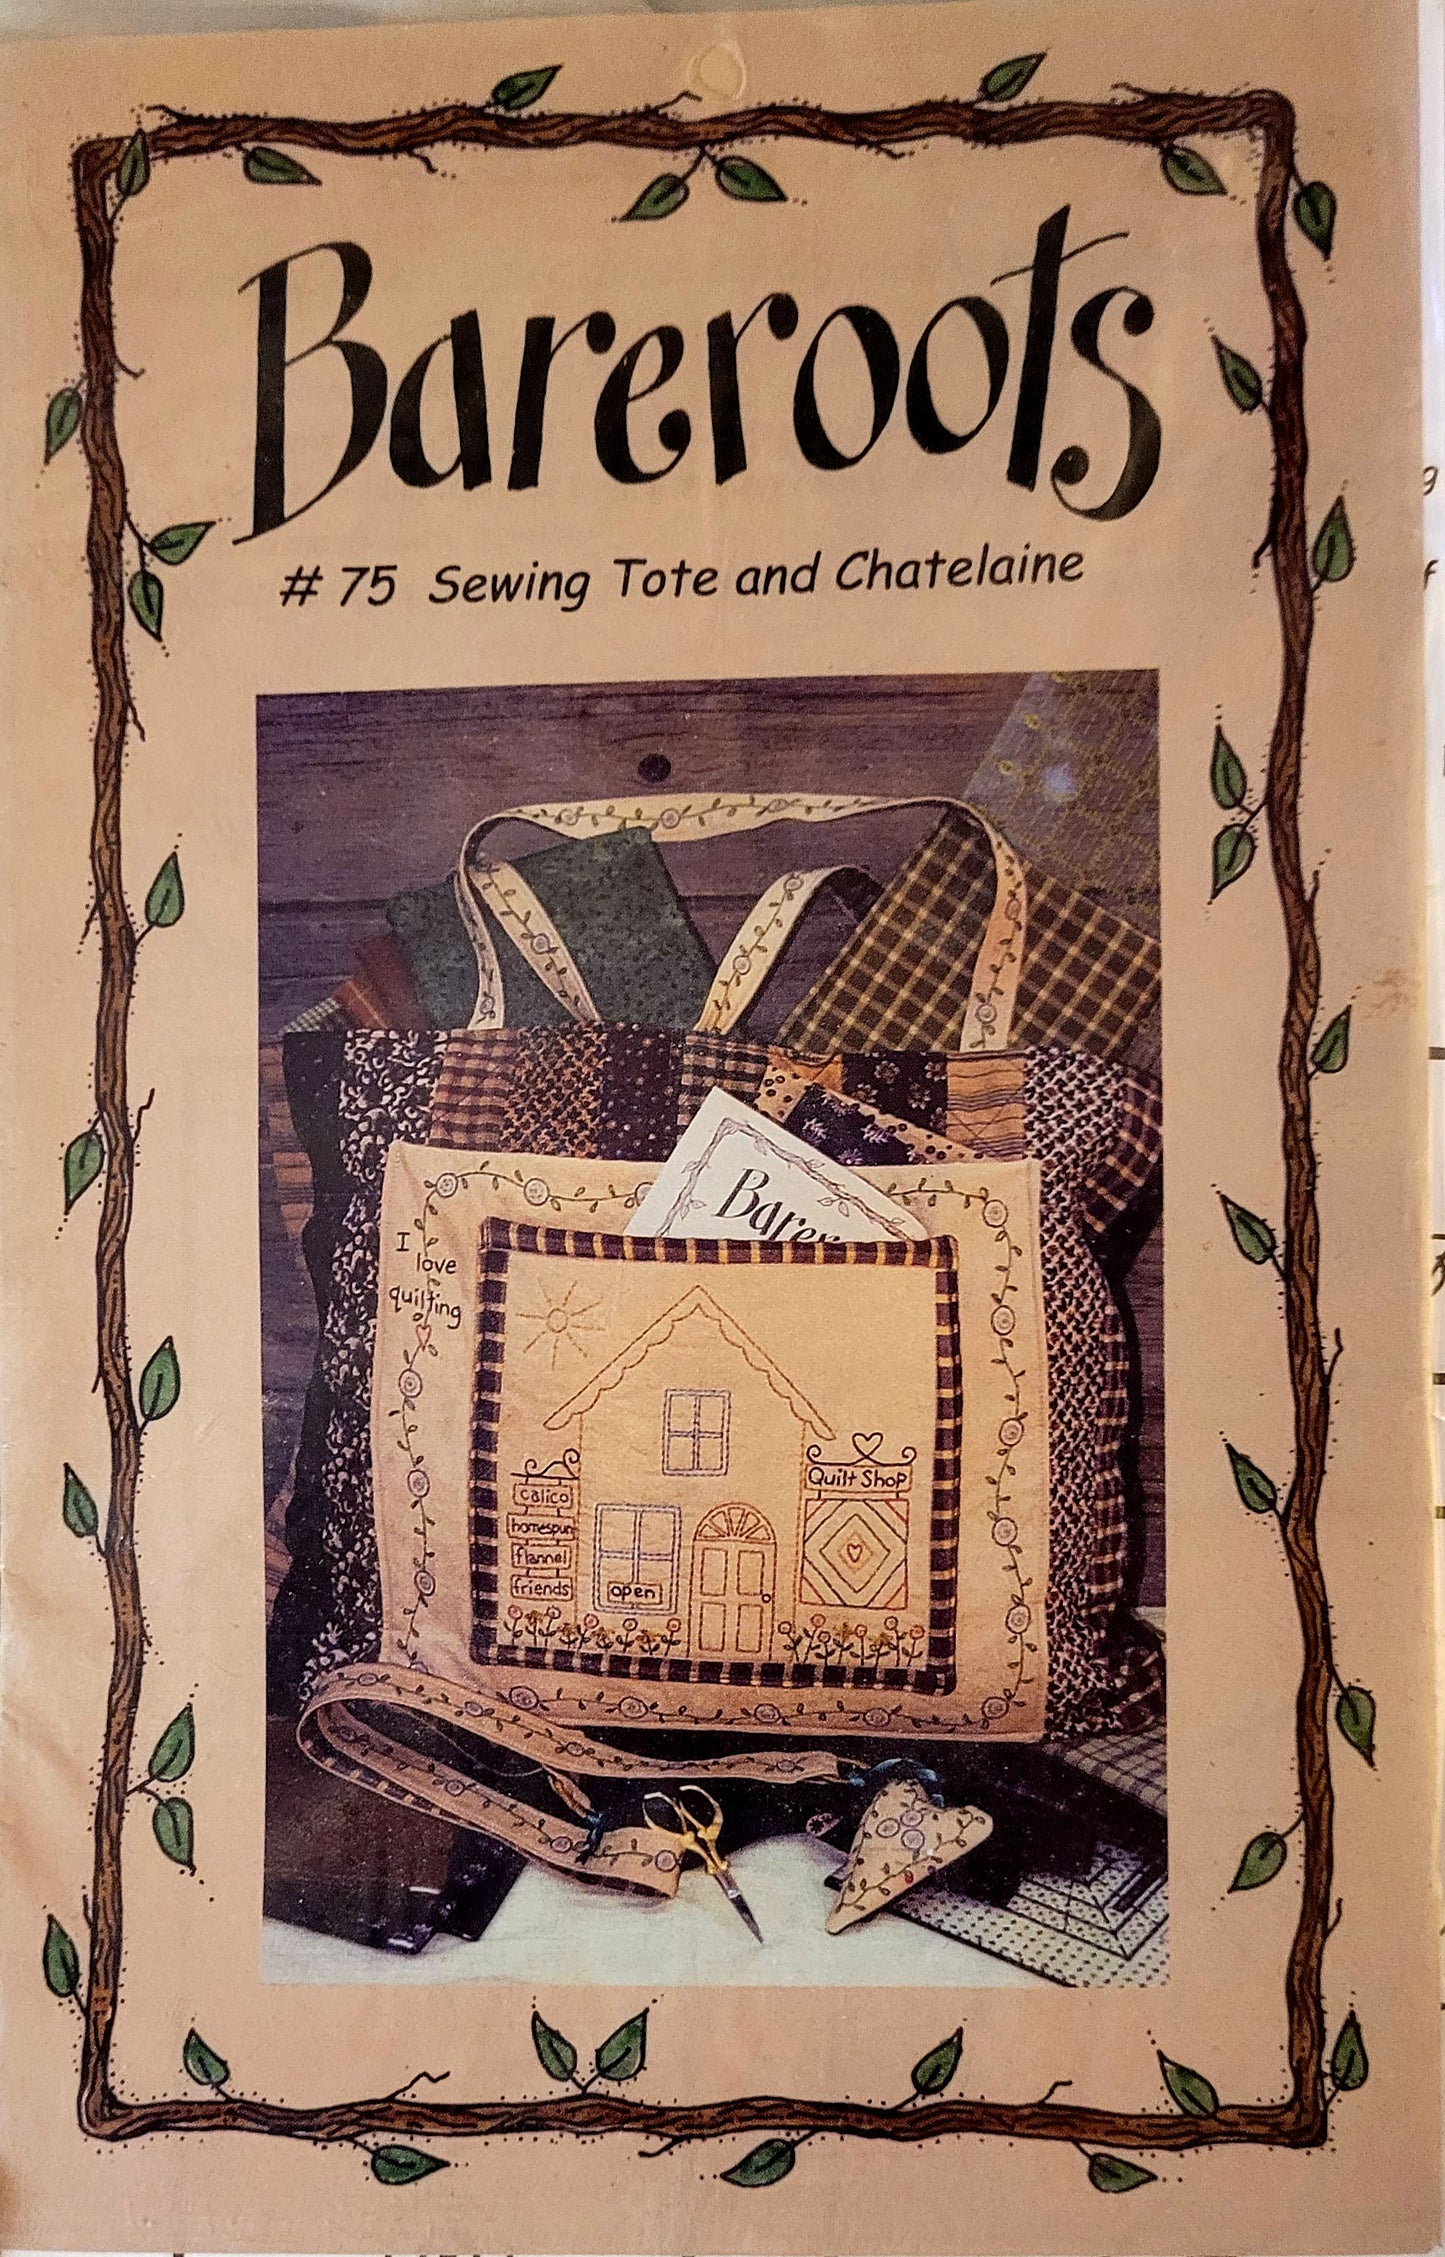 Bareroots #75, Sewing Tote & Chatelaine Patterns (15.5"x21") @2001